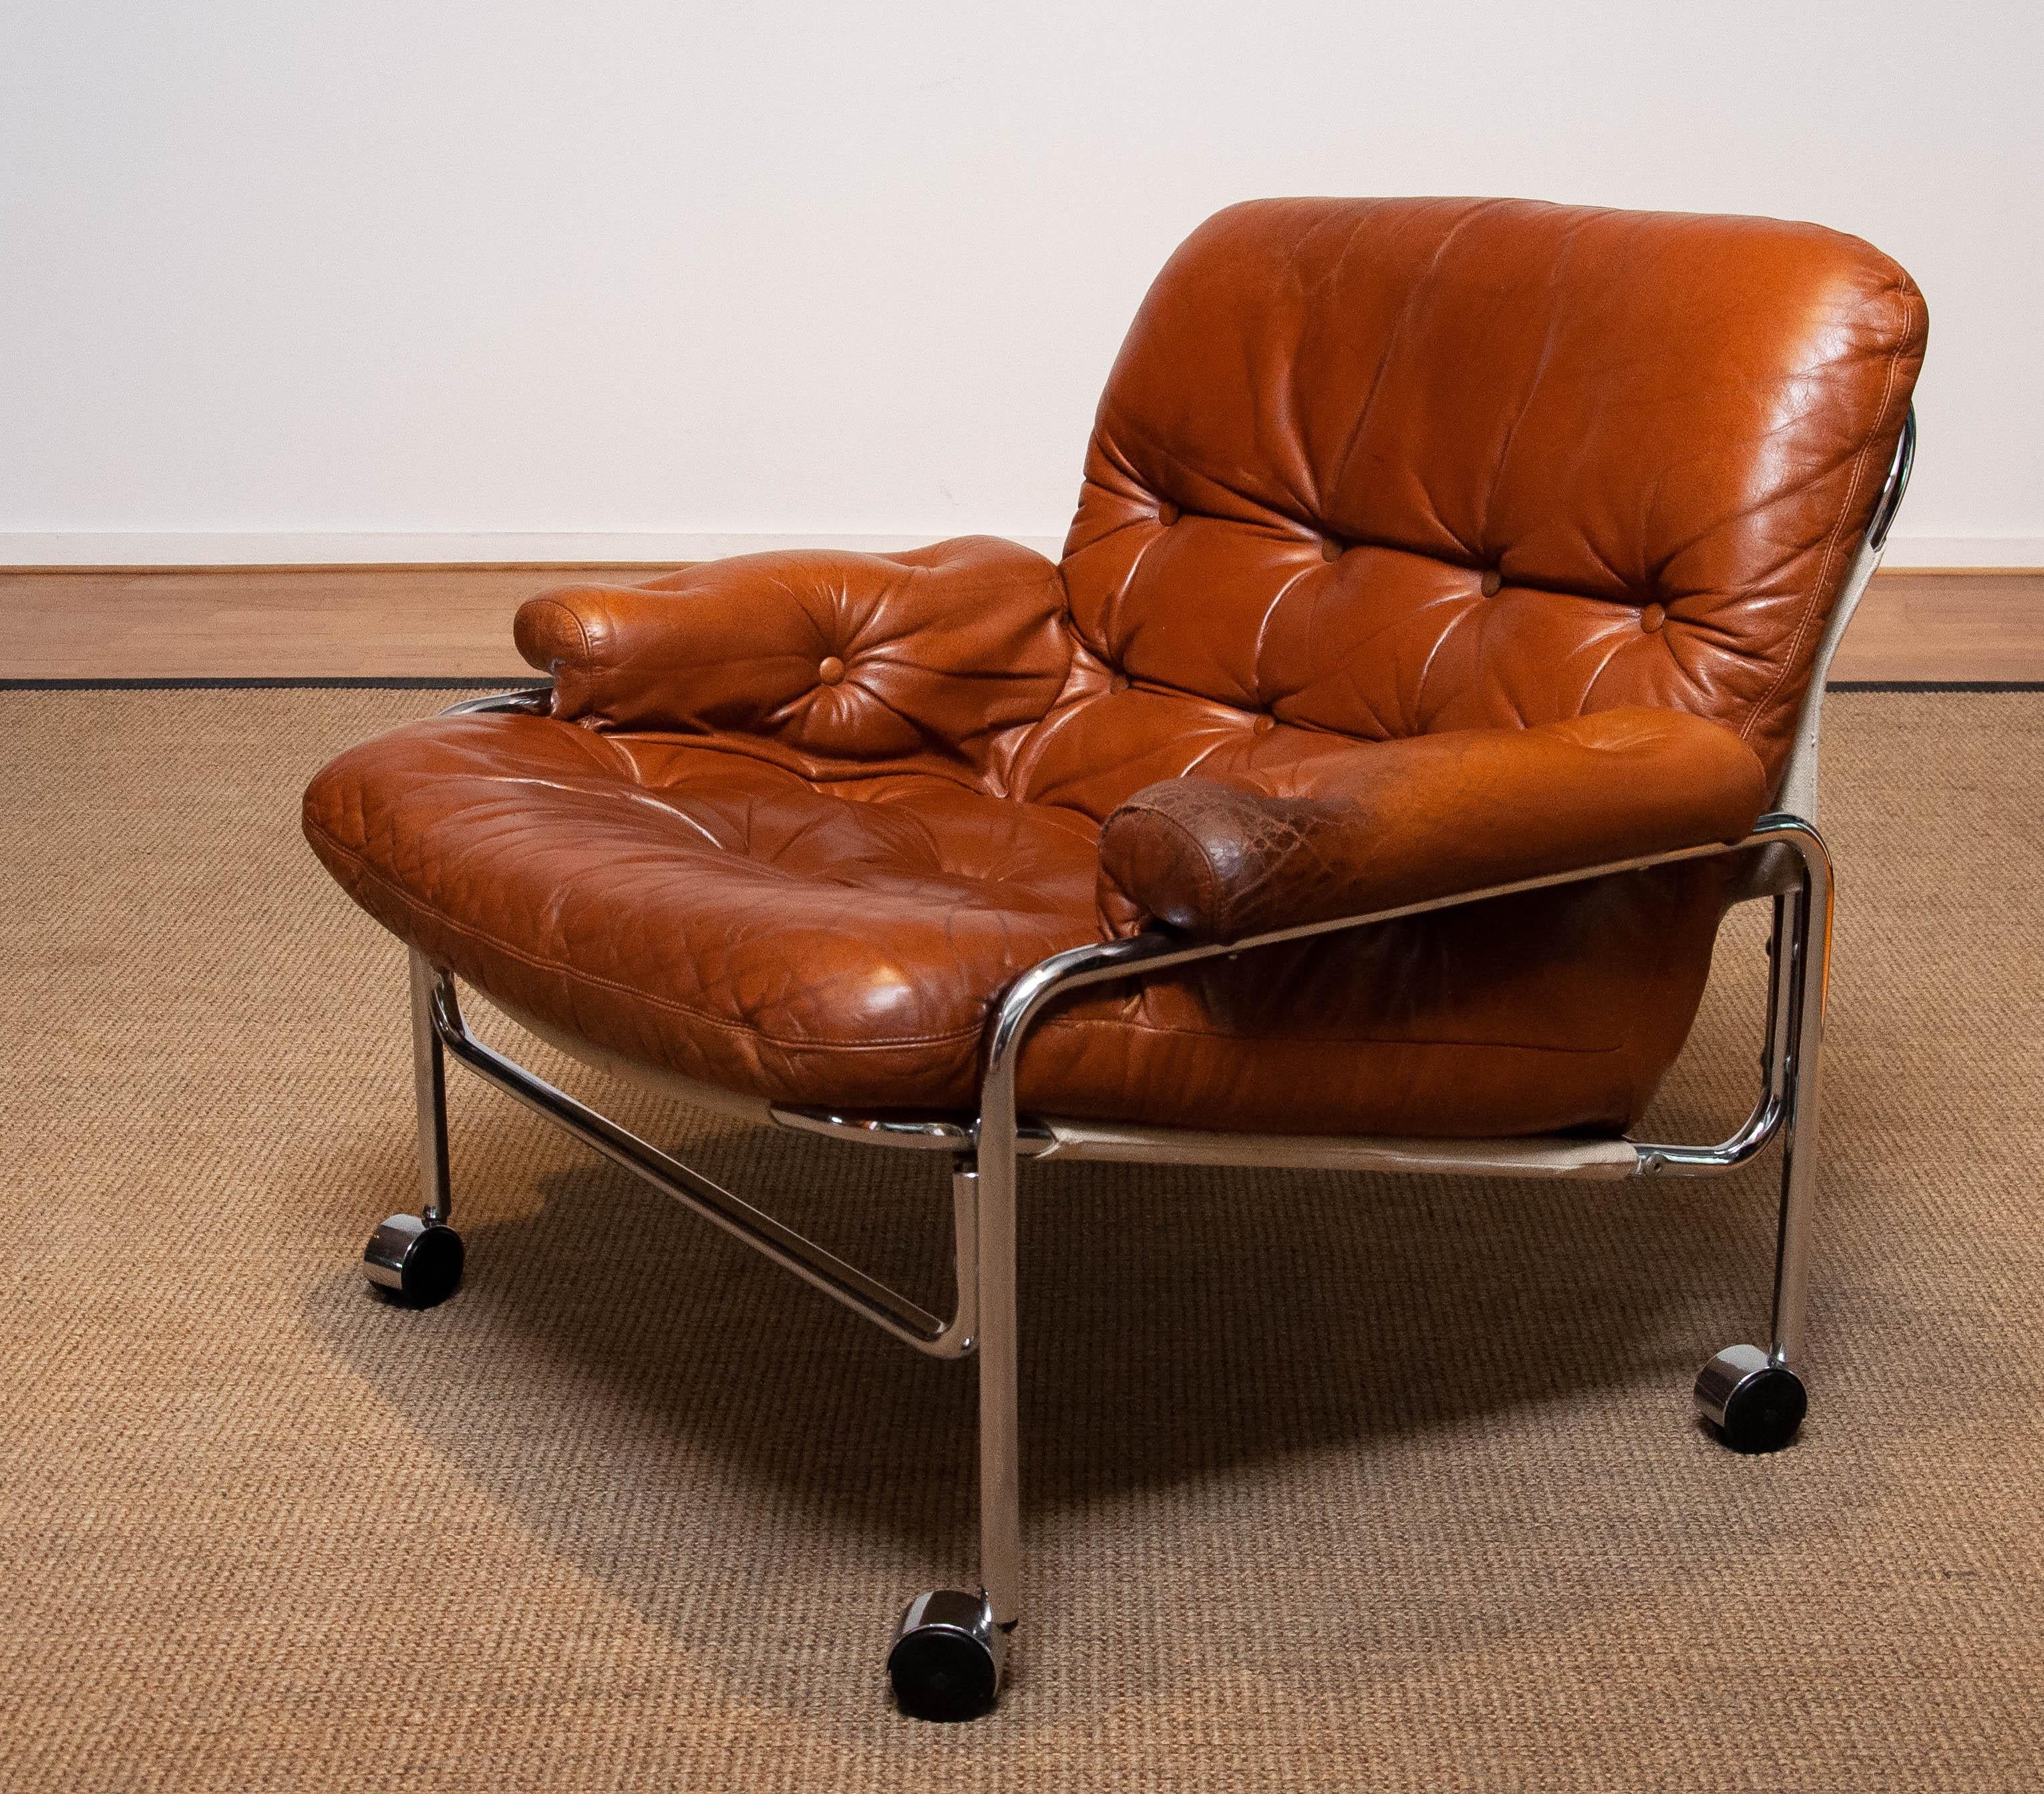 1960s leather chair